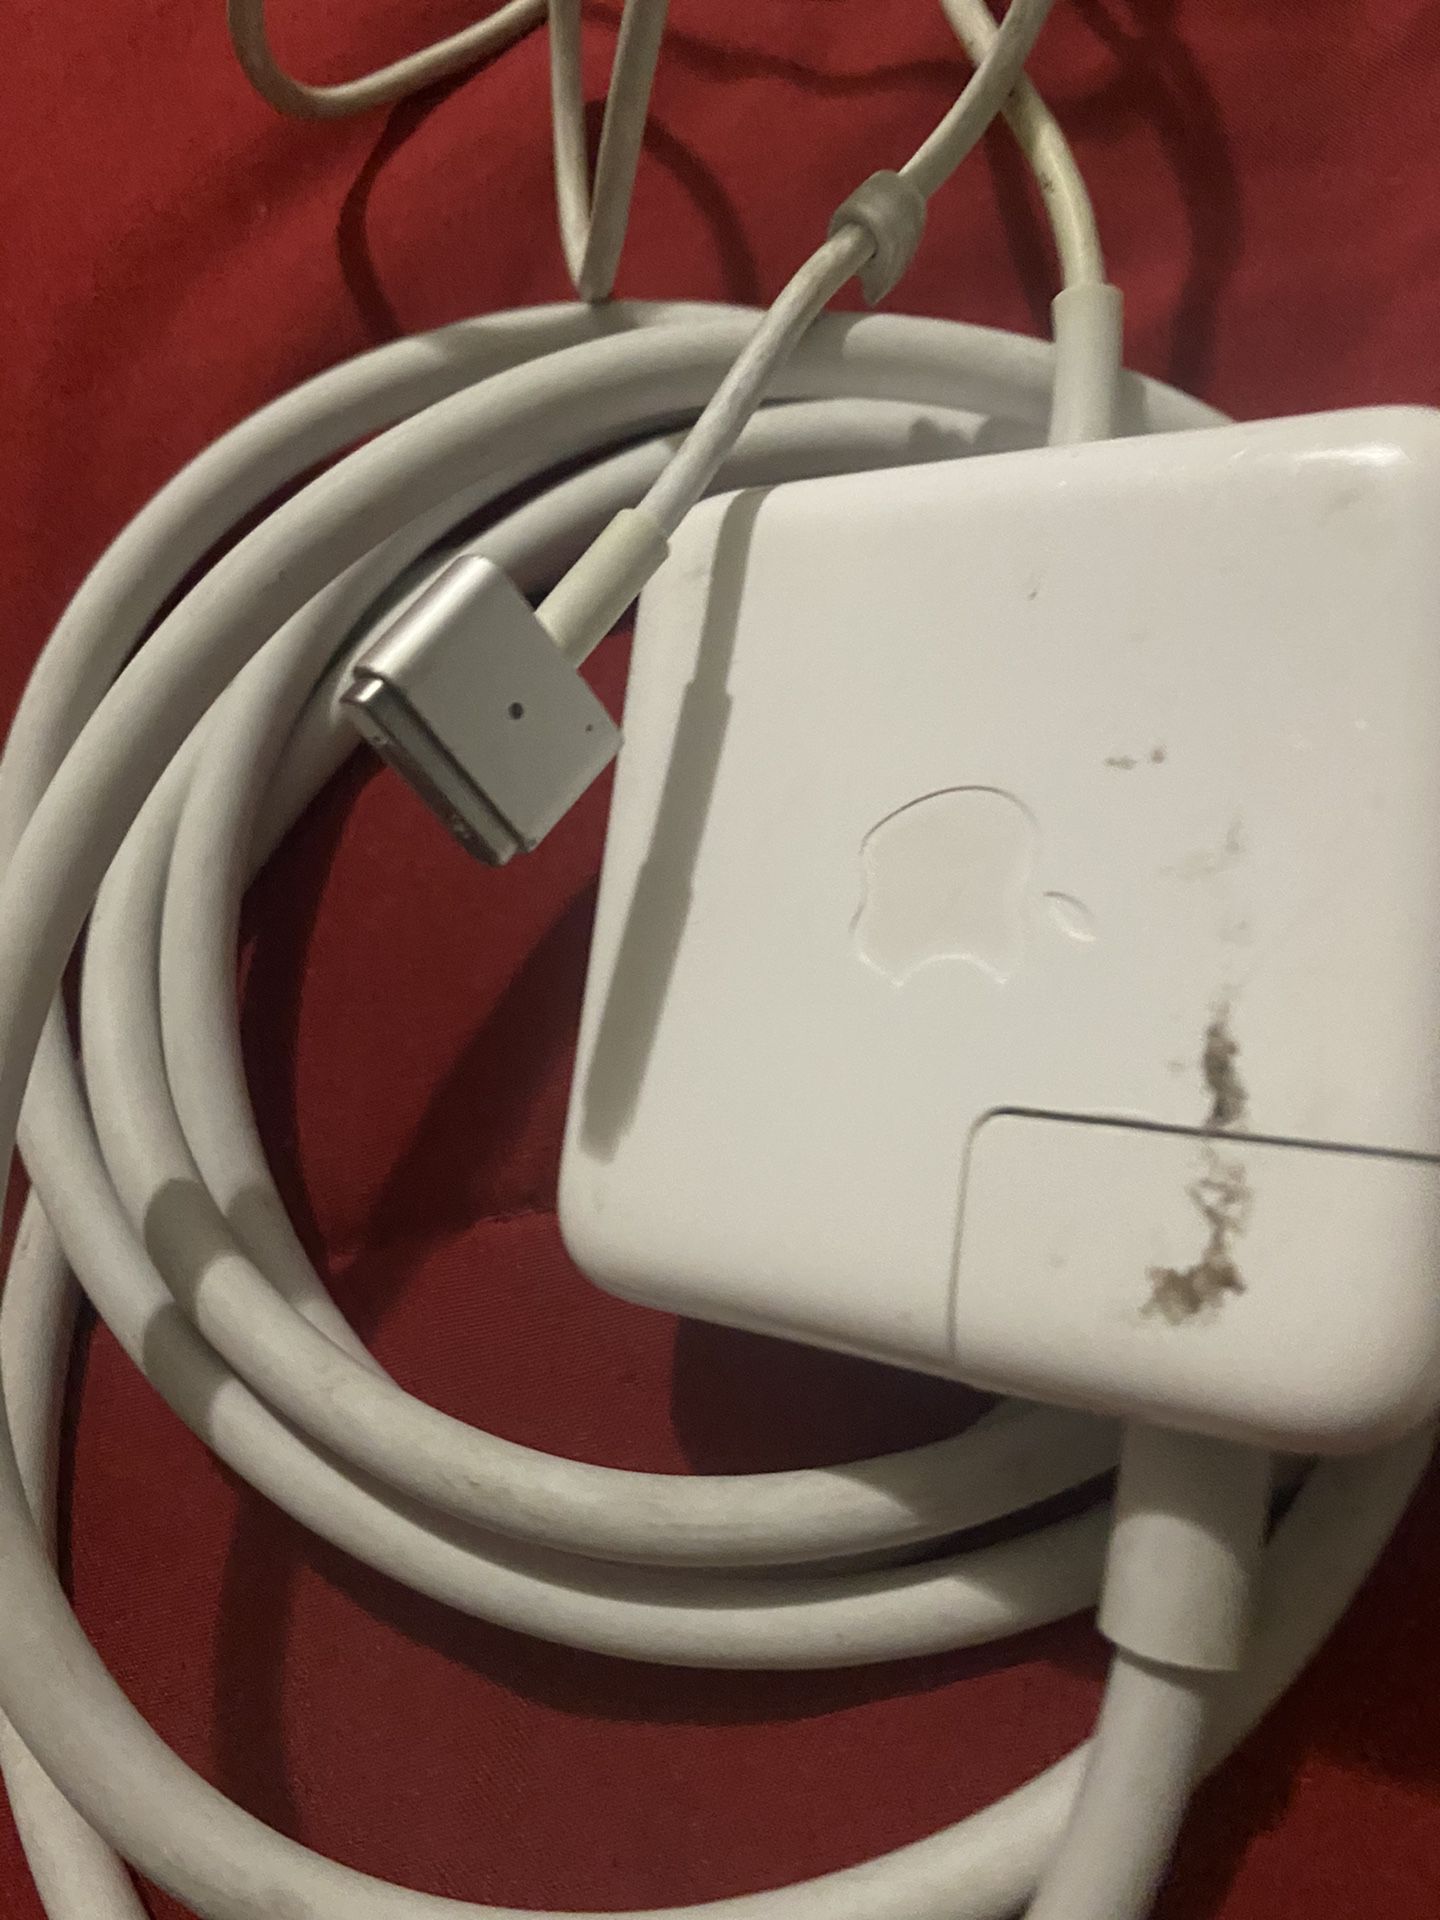 MacBook Air 2017 charger